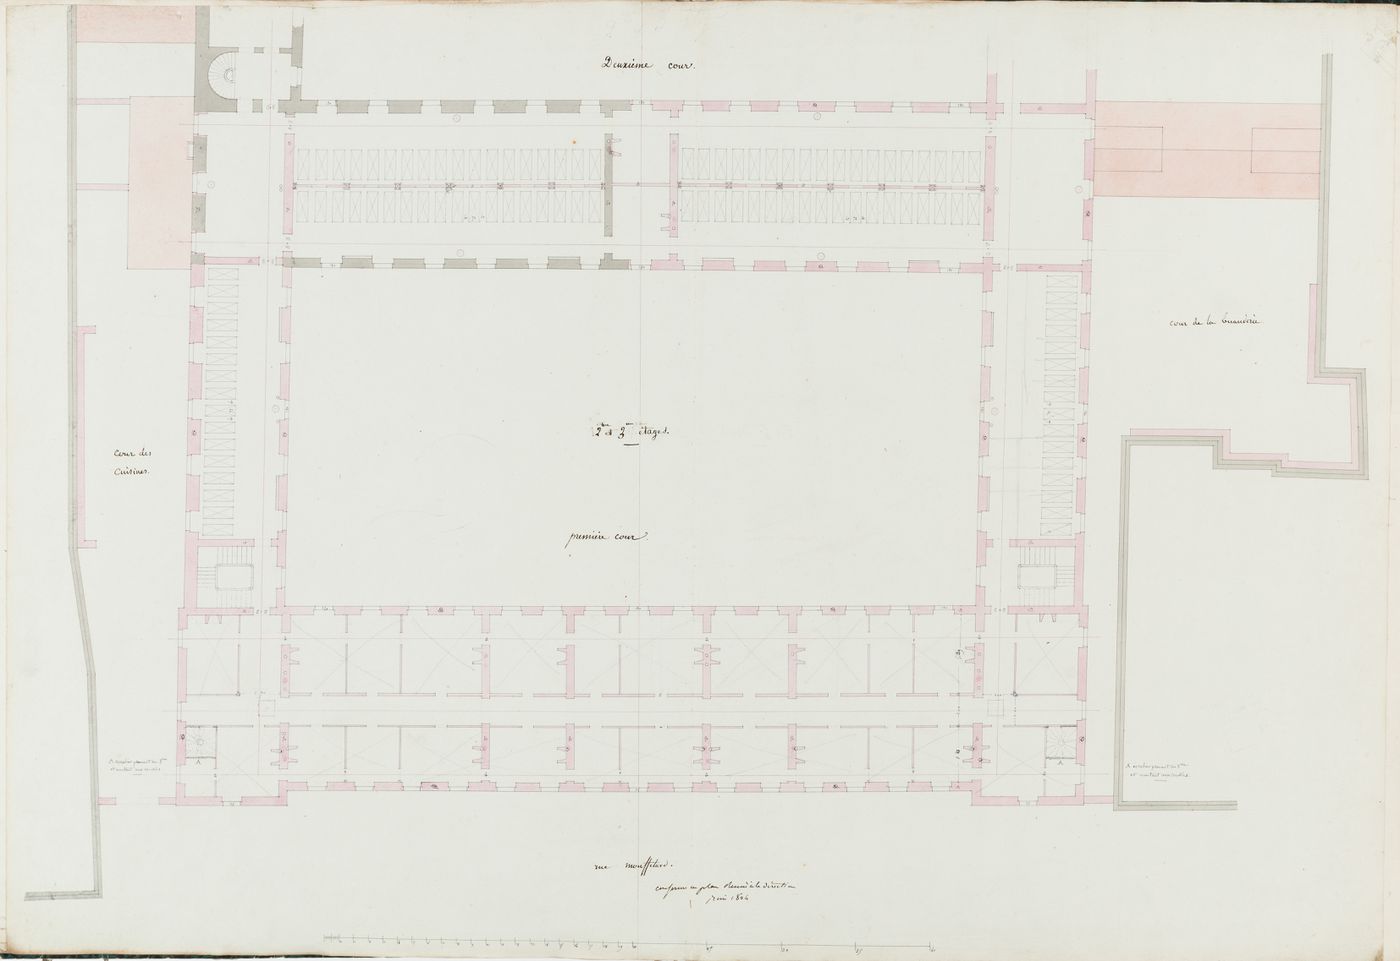 Project for the caserne de la Gendarmerie royale, rue Mouffetard: Second and third floor plan for the buildings surrounding the first courtyard